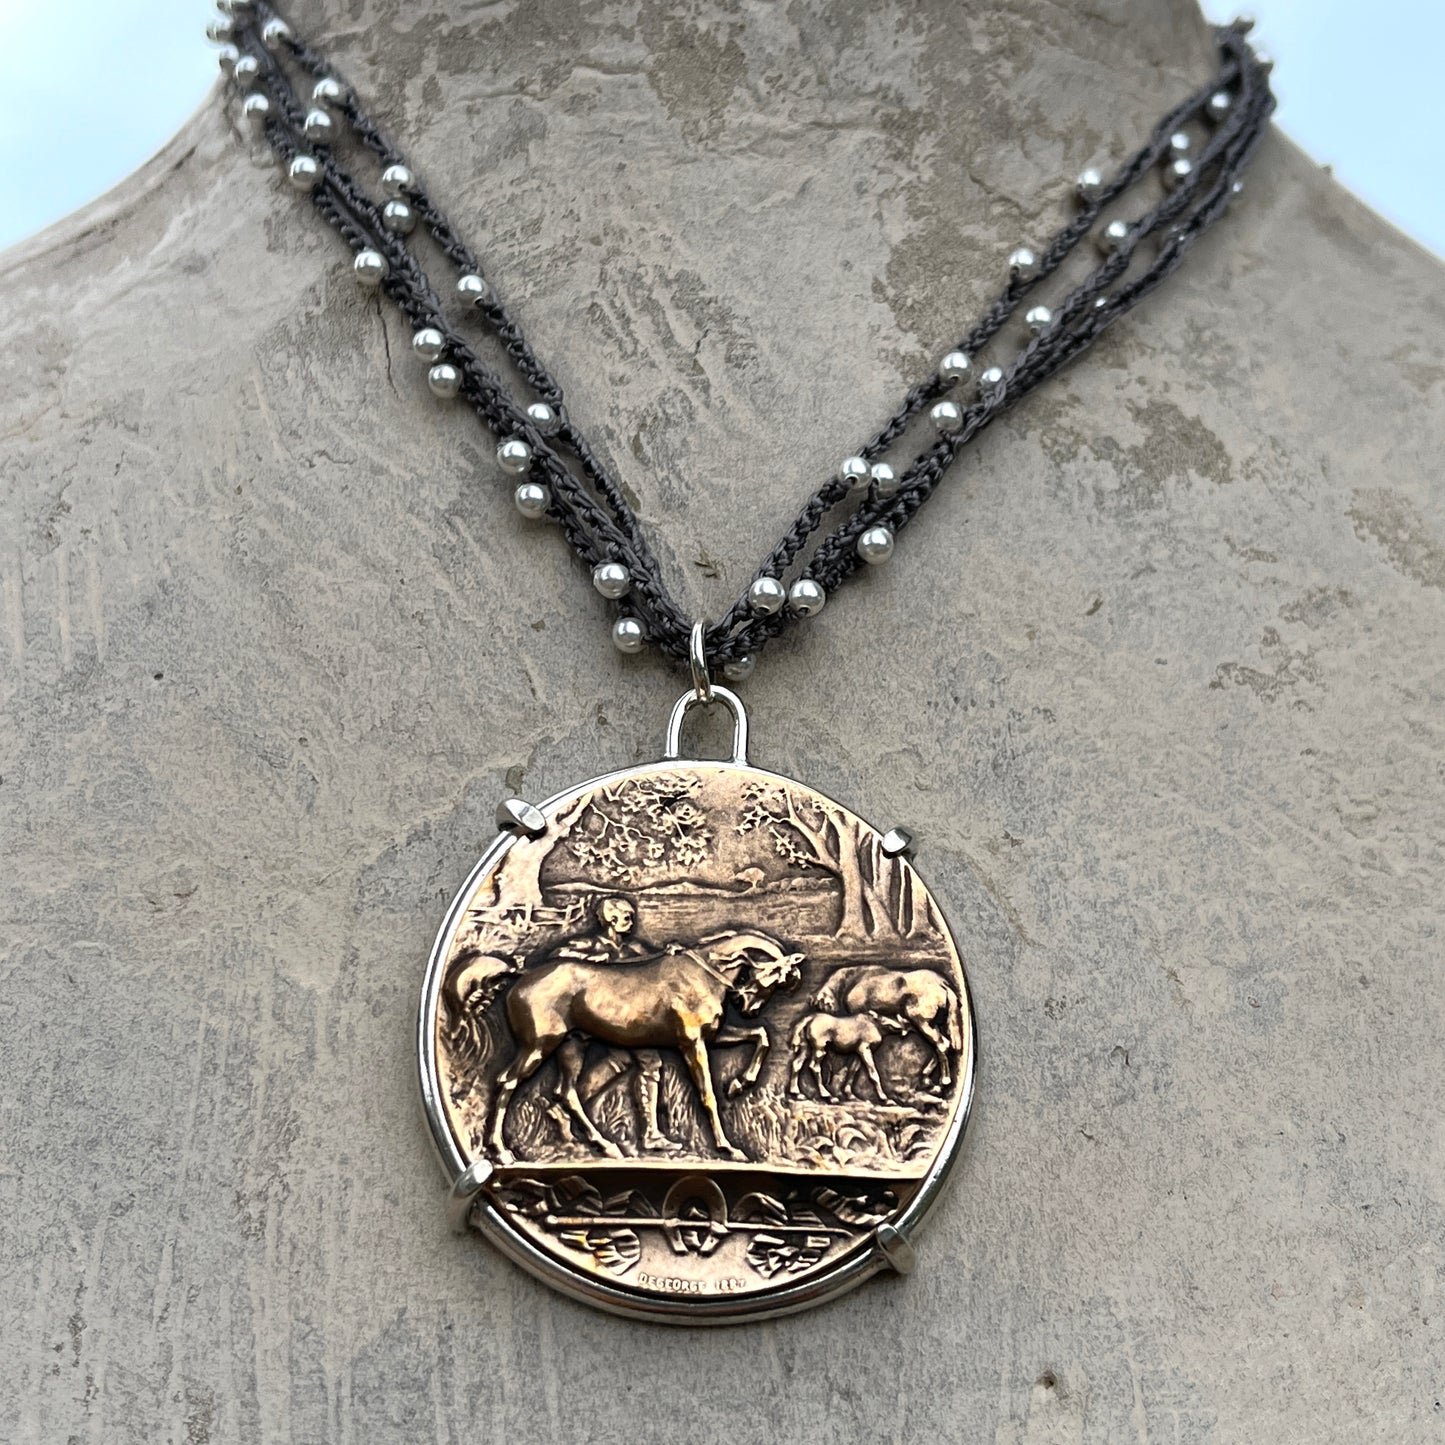 1913 Bucolic Horse Medal on Triple Strand Necklace